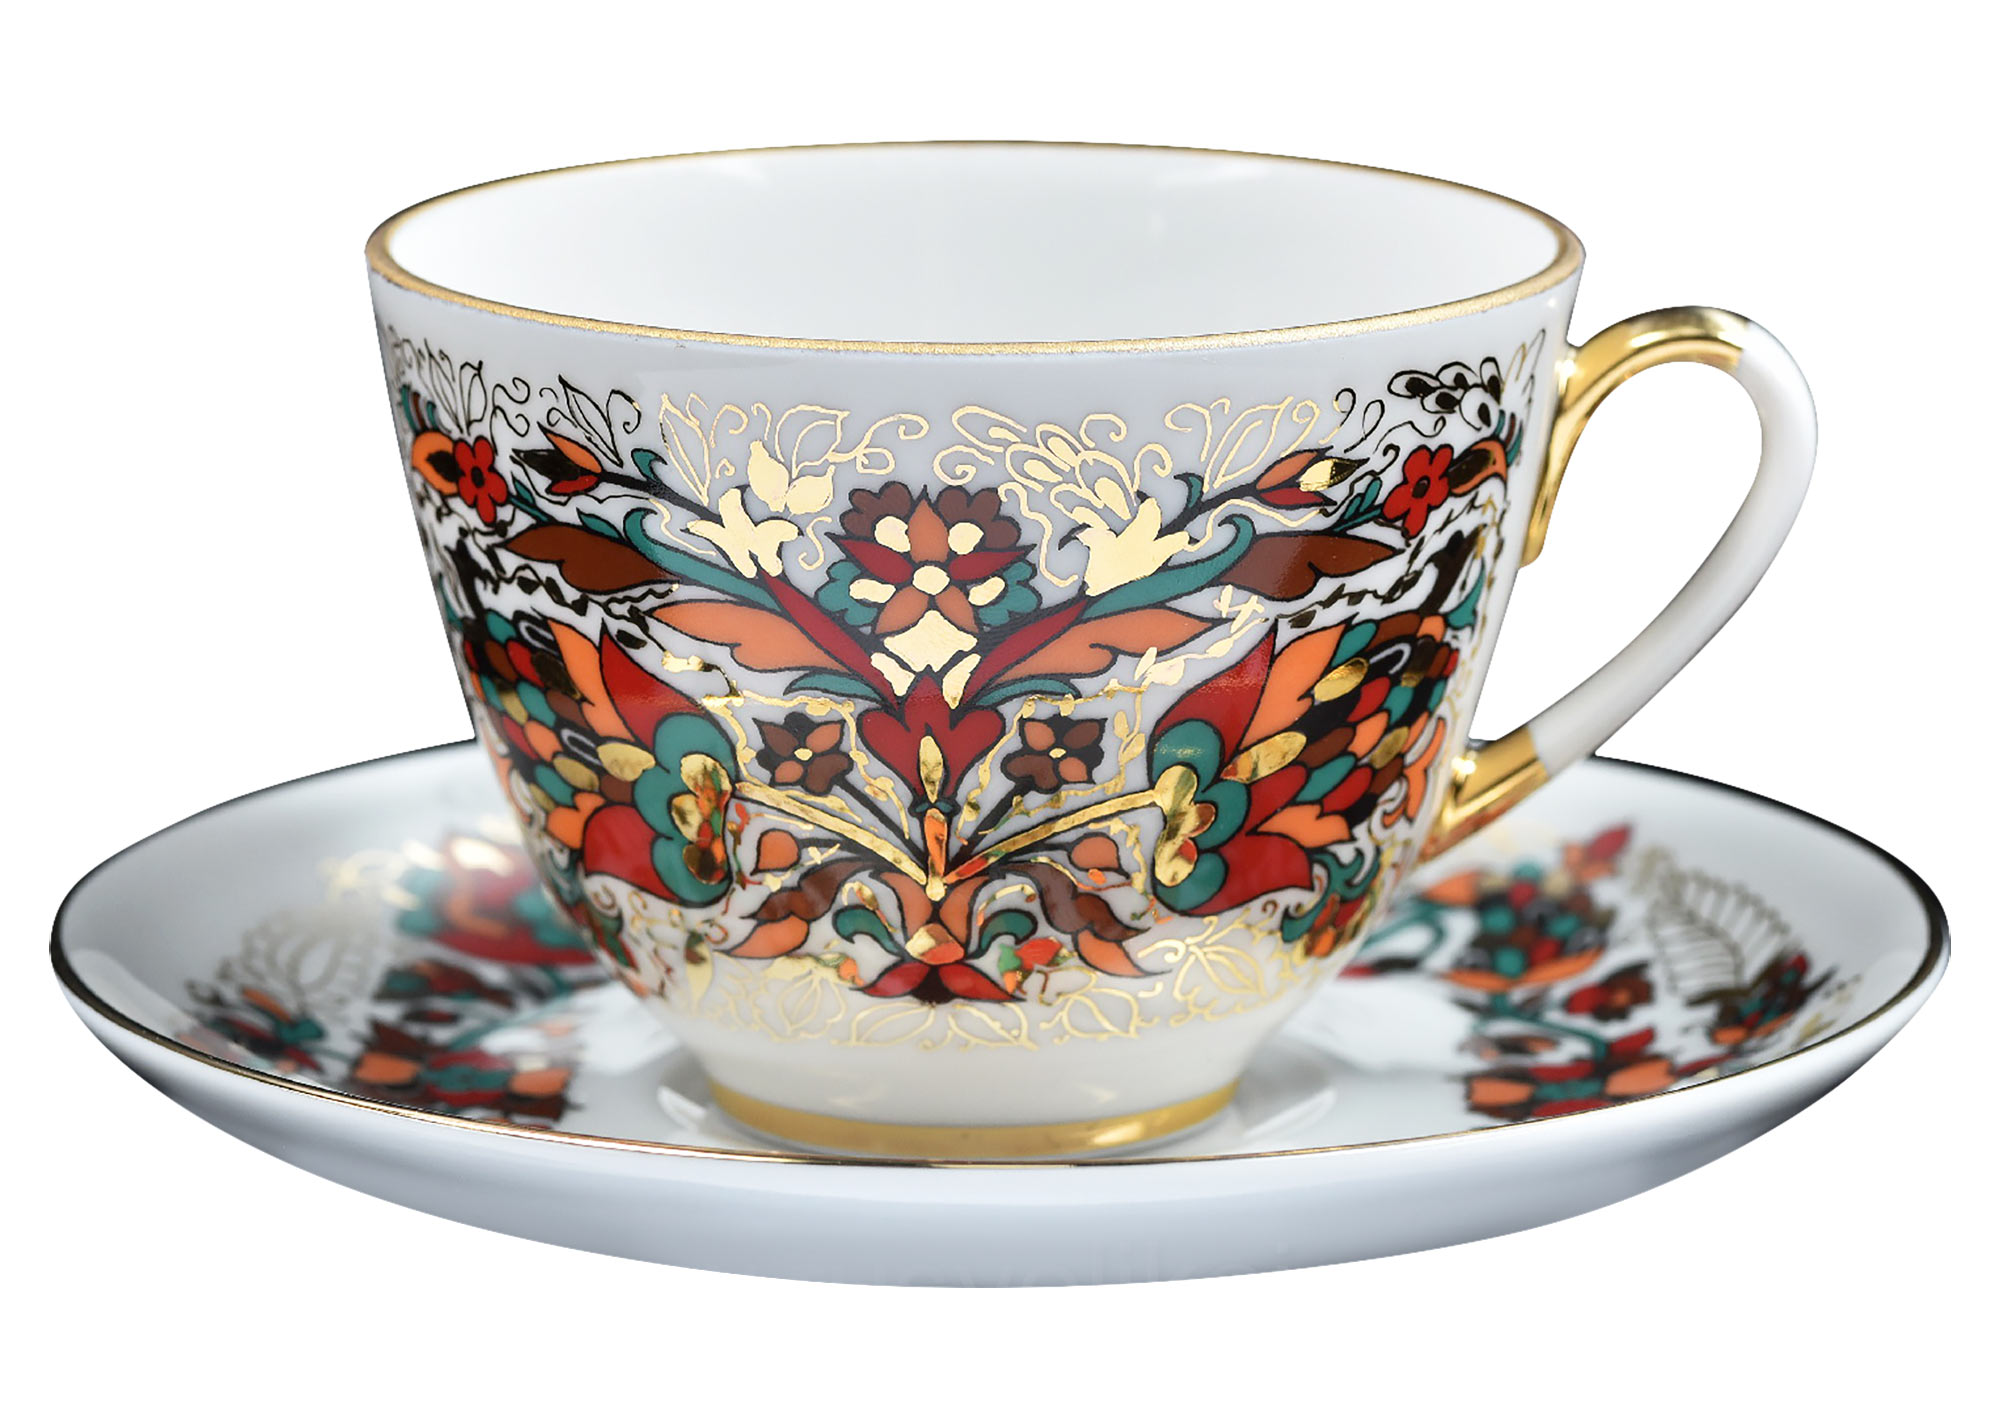 Buy Red and Gold Rooster Cup and Saucer at GoldenCockerel.com